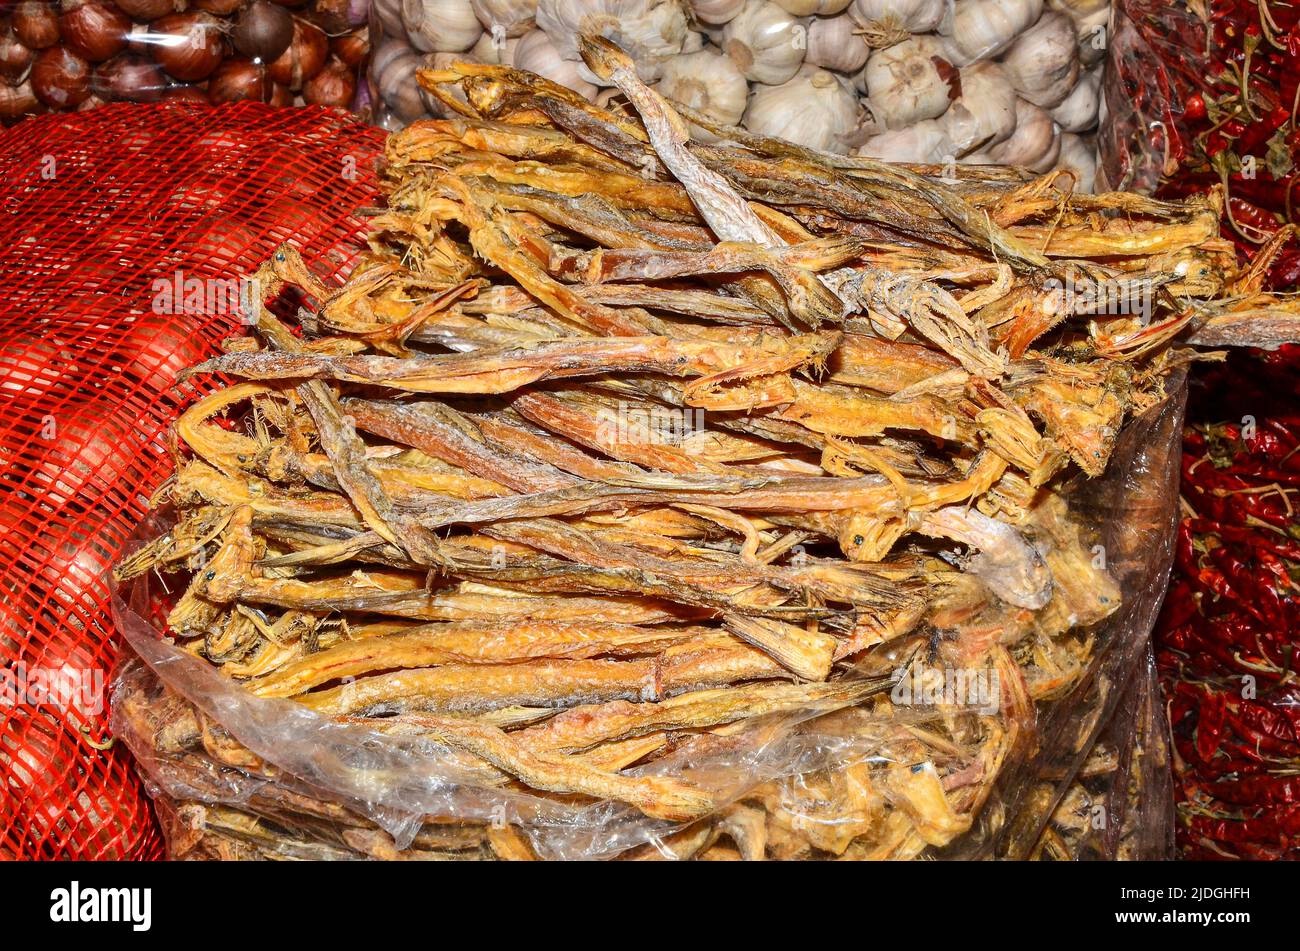 dried fish for sale in the market Stock Photo